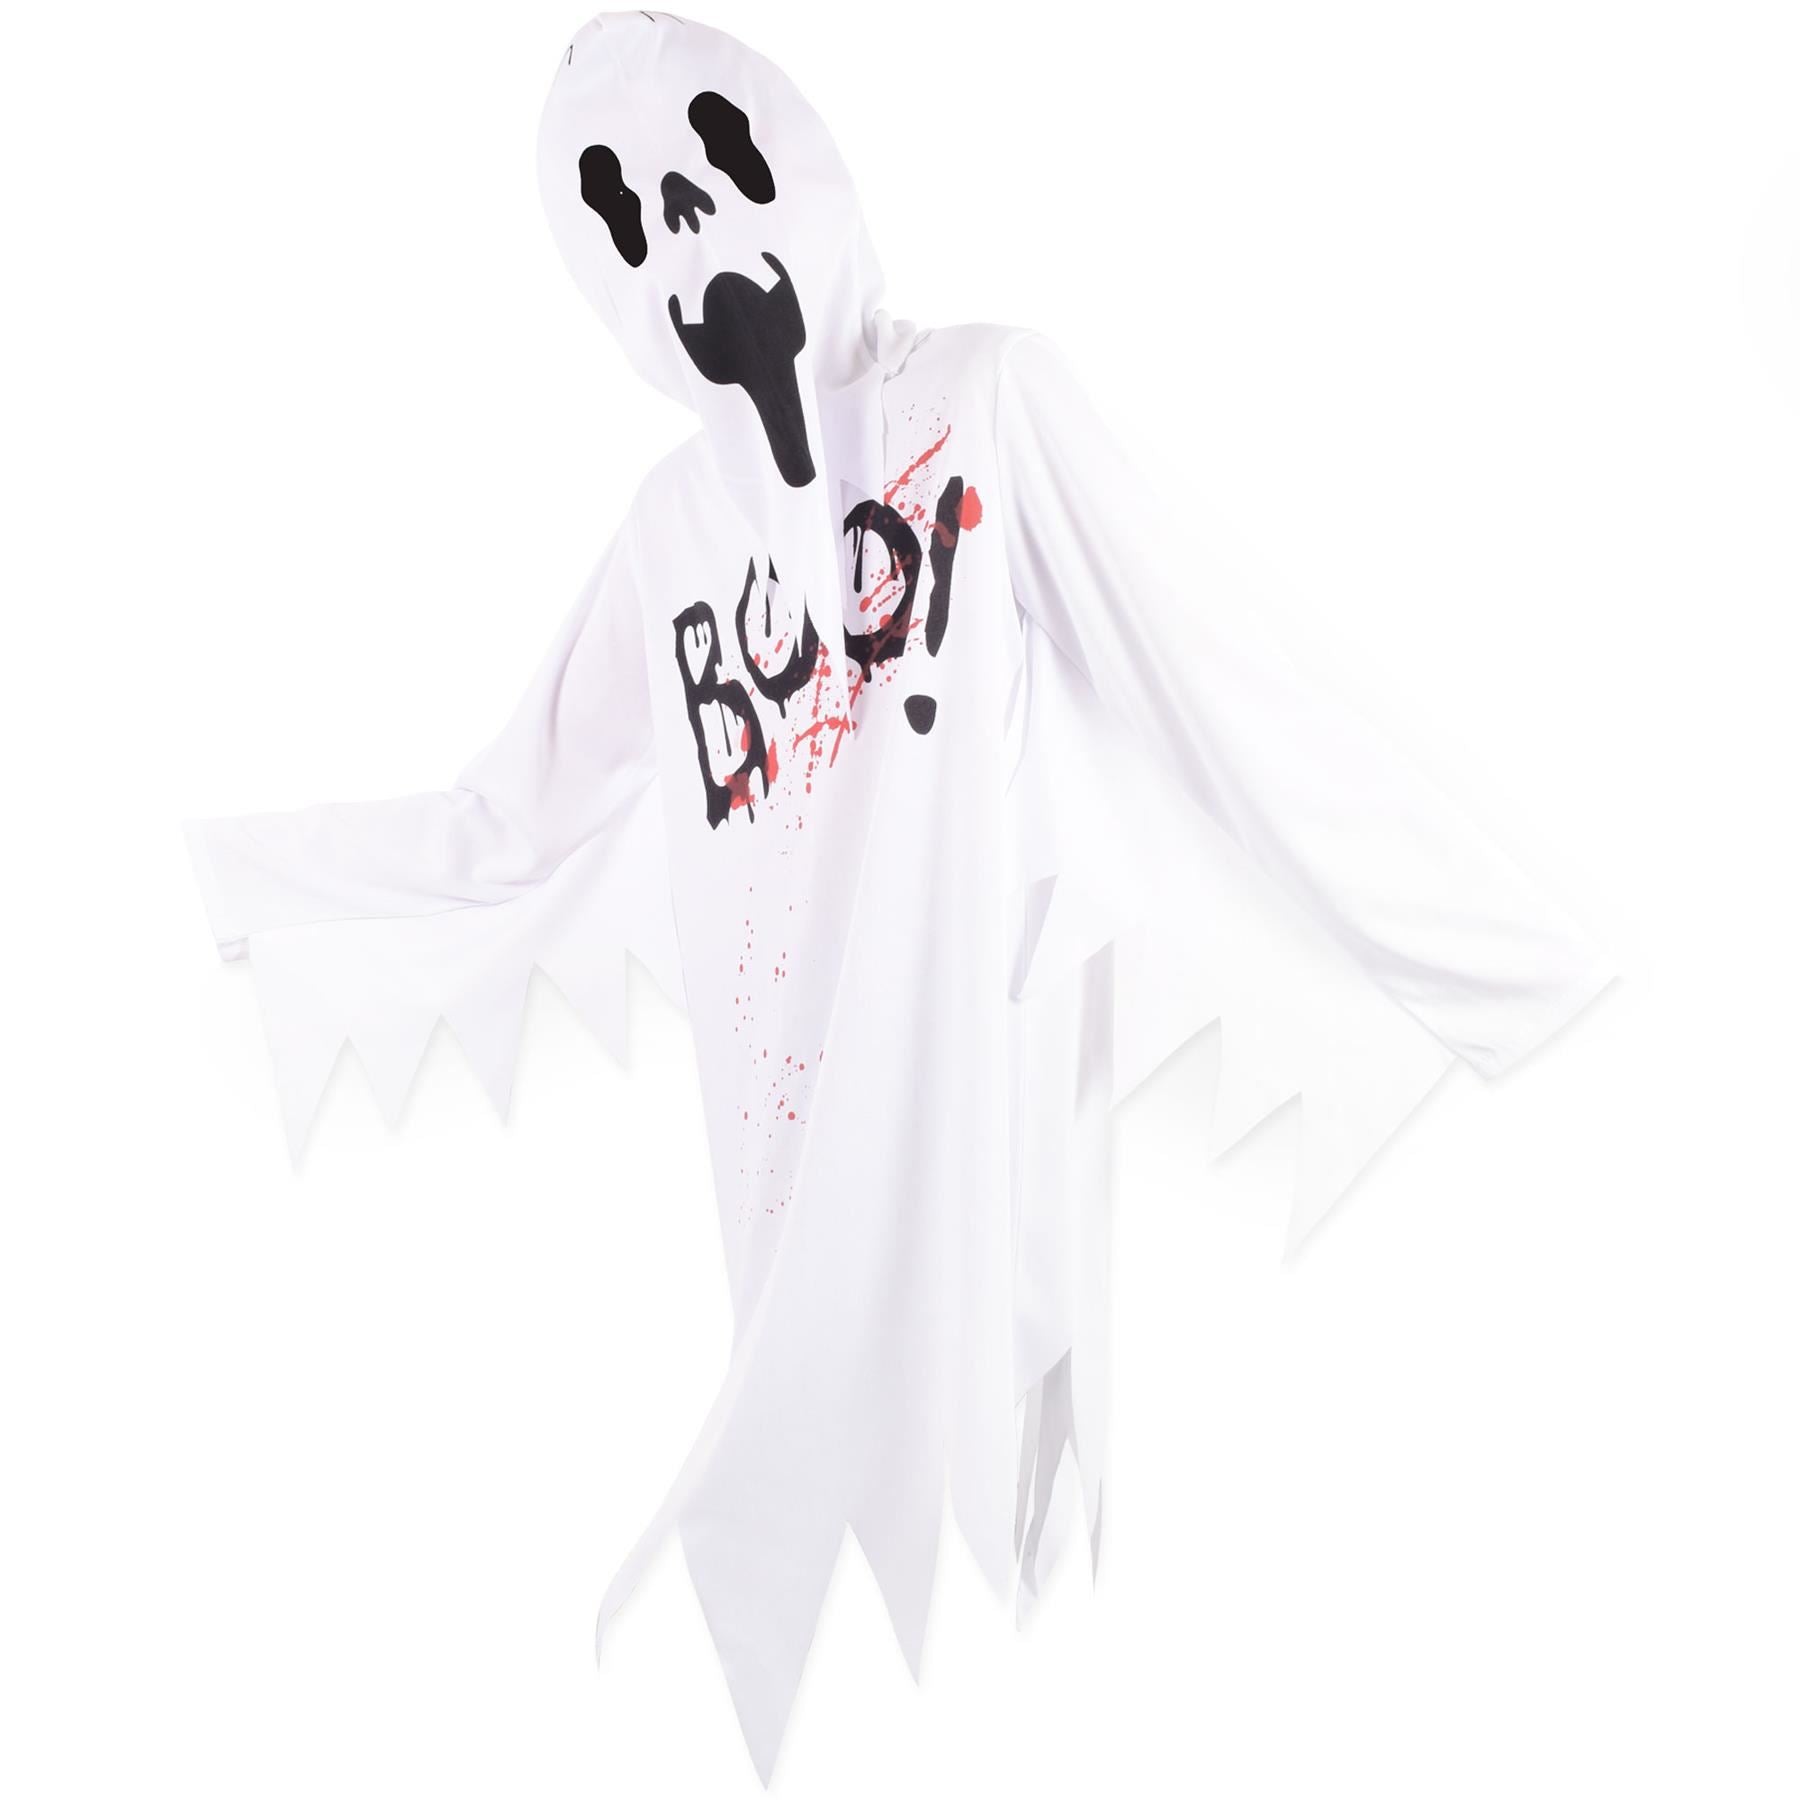 Kids Girls Boys Top BOO Printed Halloween Spooky Ghost Costume Scary White Top